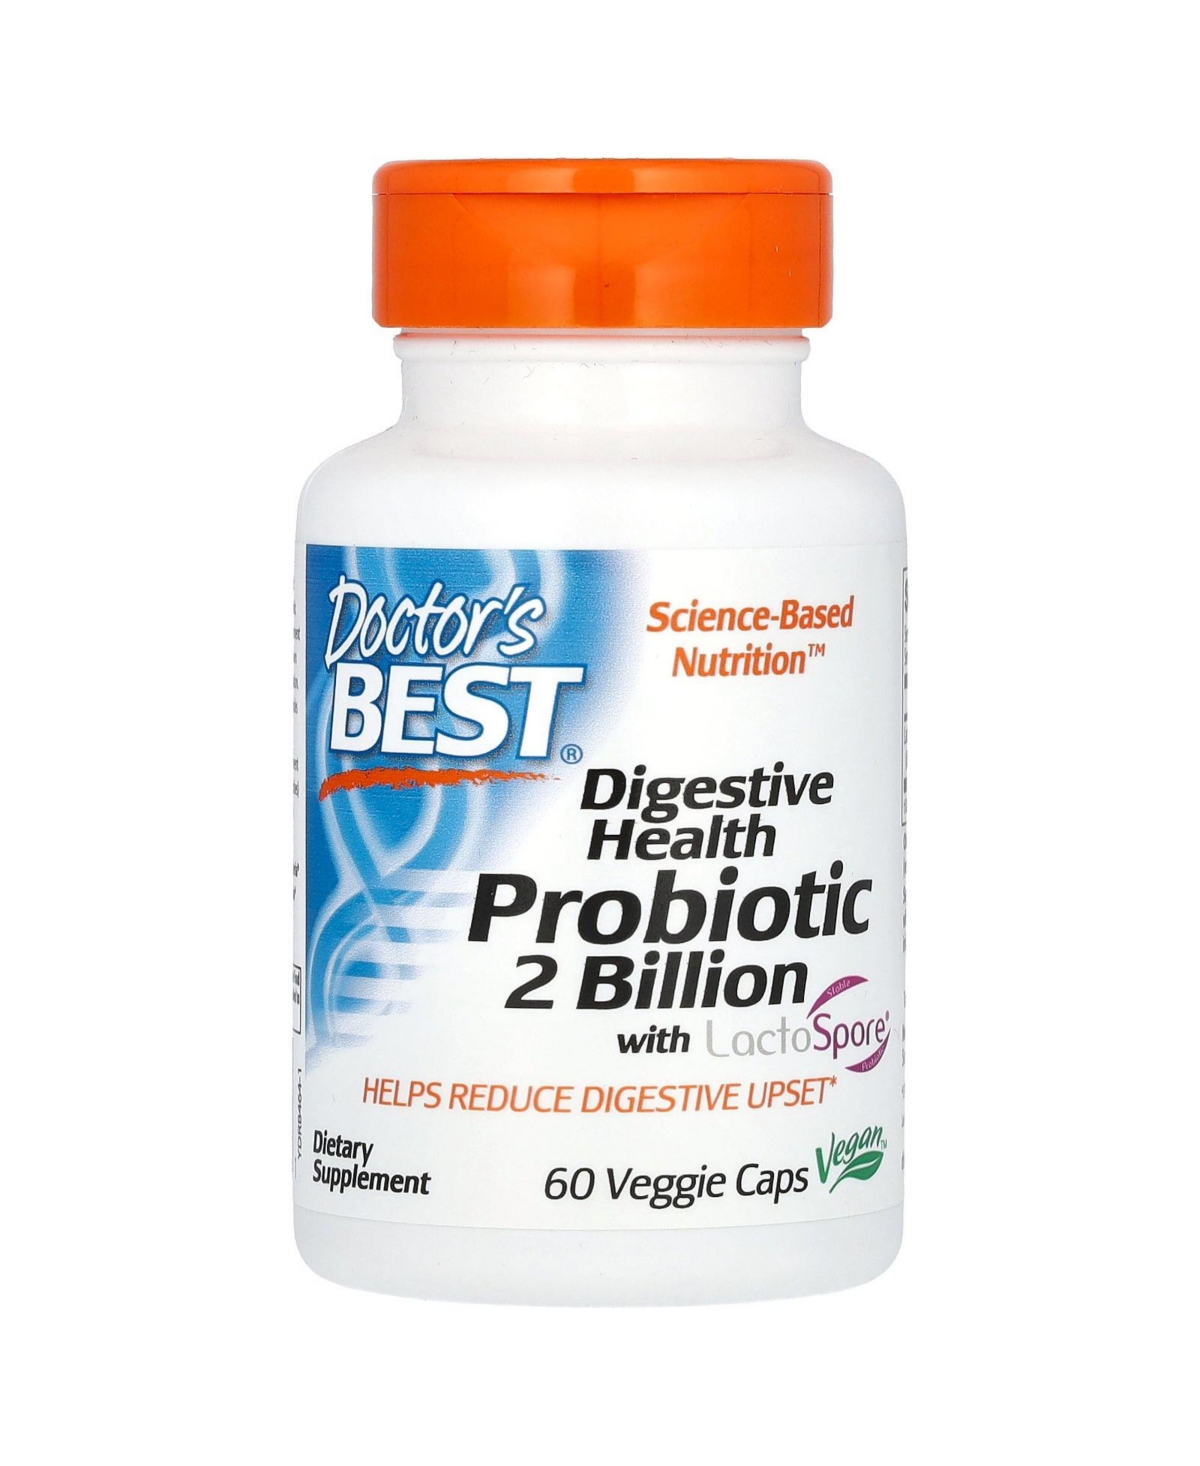 Digestive Health Probiotic 2 Billion with LactoSpore - 60 Veggie Caps - Assorted Pre-pack (See Table